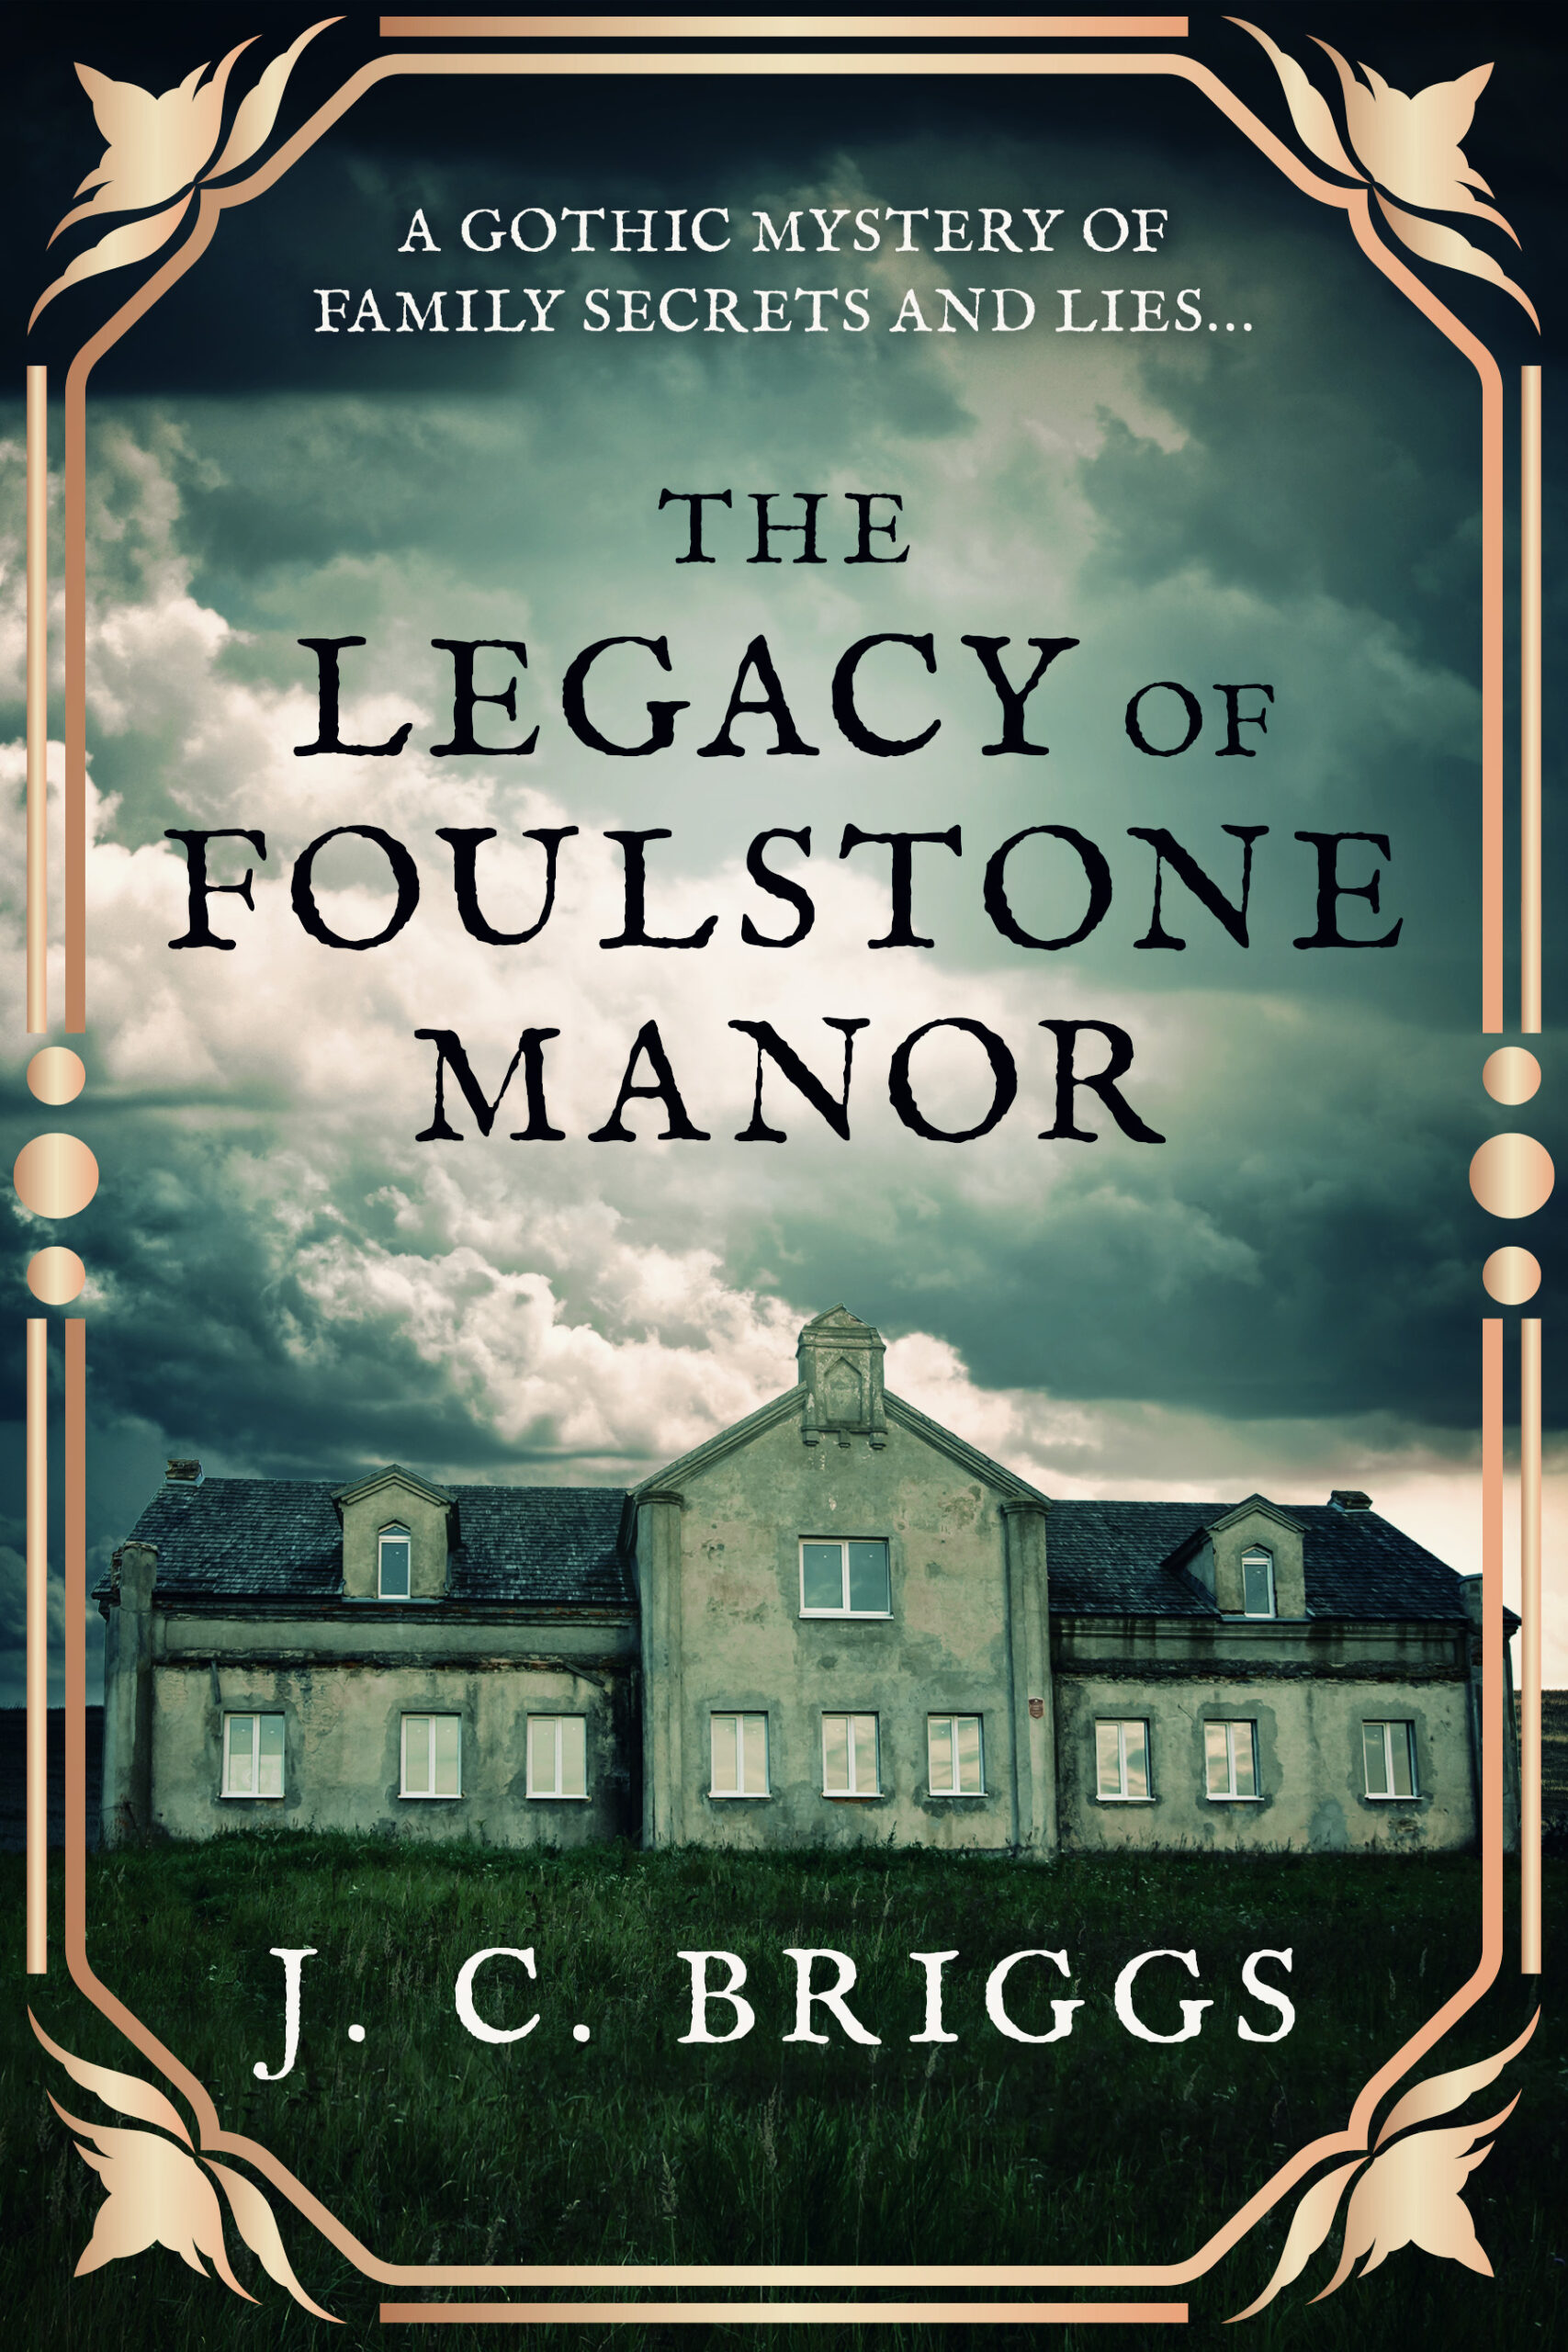 The Legacy of Foulstone Manor is out Today!